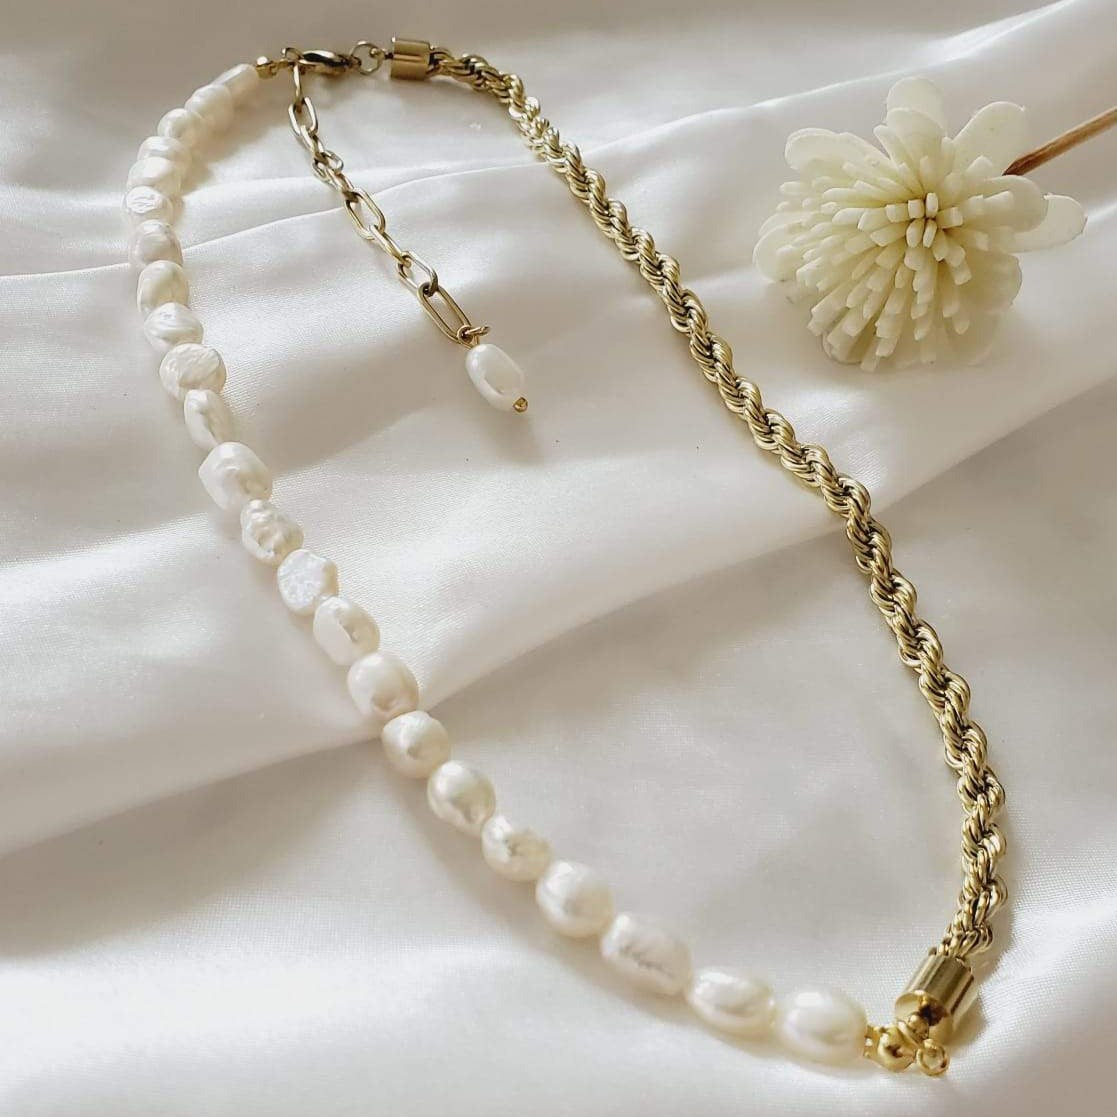 Water Resistant Jewelry, Water Resistant Necklace, Tarnish Free Necklace, Tarnish Free Jewelry, Hypoallergenic Necklace, Hypoallergenic Jewelry, Pearl Necklace, Pearl Jewelry, Hey Harper Jewelry, Missomma Jewelry, Ellie Vail Jewelry, Minimalist Jewelry, Gift for her, Gift for mom, Bold Look